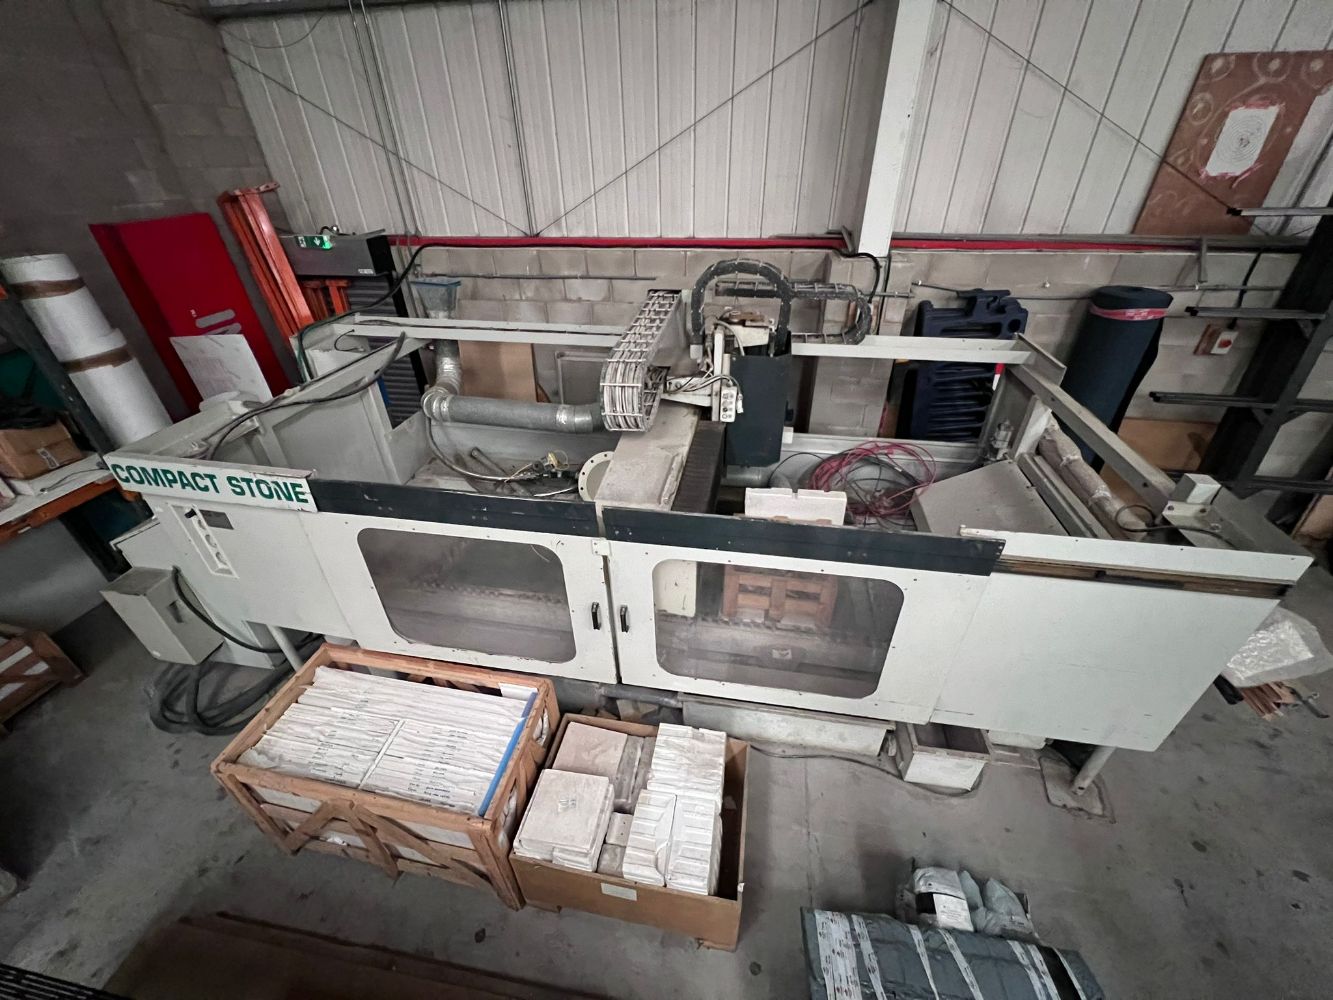 5% commission on a Off site Auction of Intermac Compact Stone CNC machine serial no. 90775 with a Broomwade Refrigerated Dryer